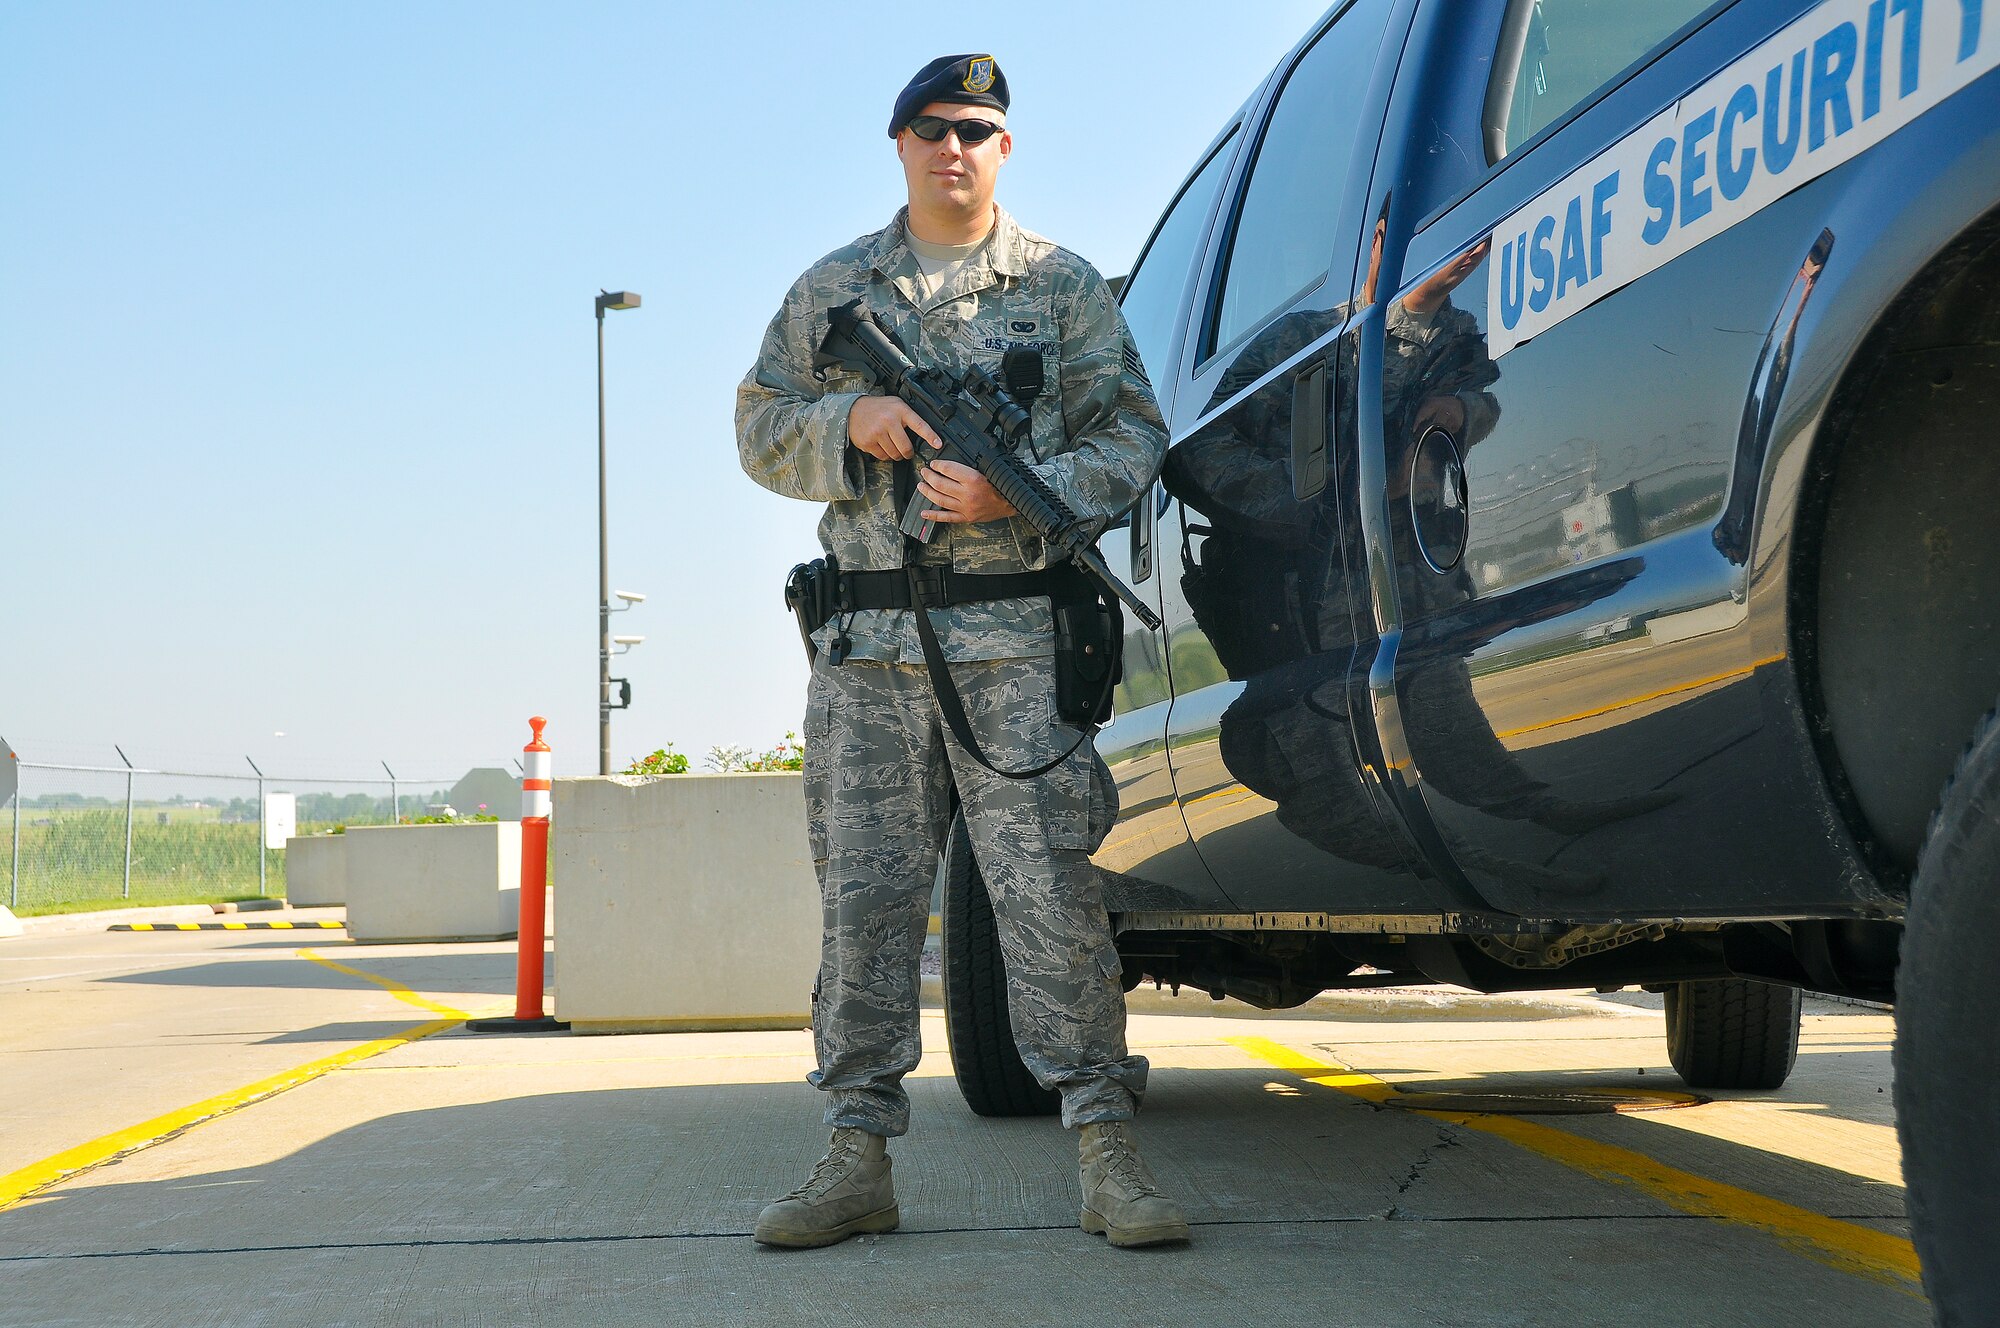 Staff Sgt. Brian Wunder, a 128 Air Refueling Wing Security Forces Squadron team member, stands guard at the base main gate Tuesday, June 23, 2009.  Wunder was one of 32 SFS Airmen from the 128th deployed to Bagram Air Base, Afghanistan, earlier this year.  (U.S. Air Force photo by Senior Airman Ryan Kuntze)